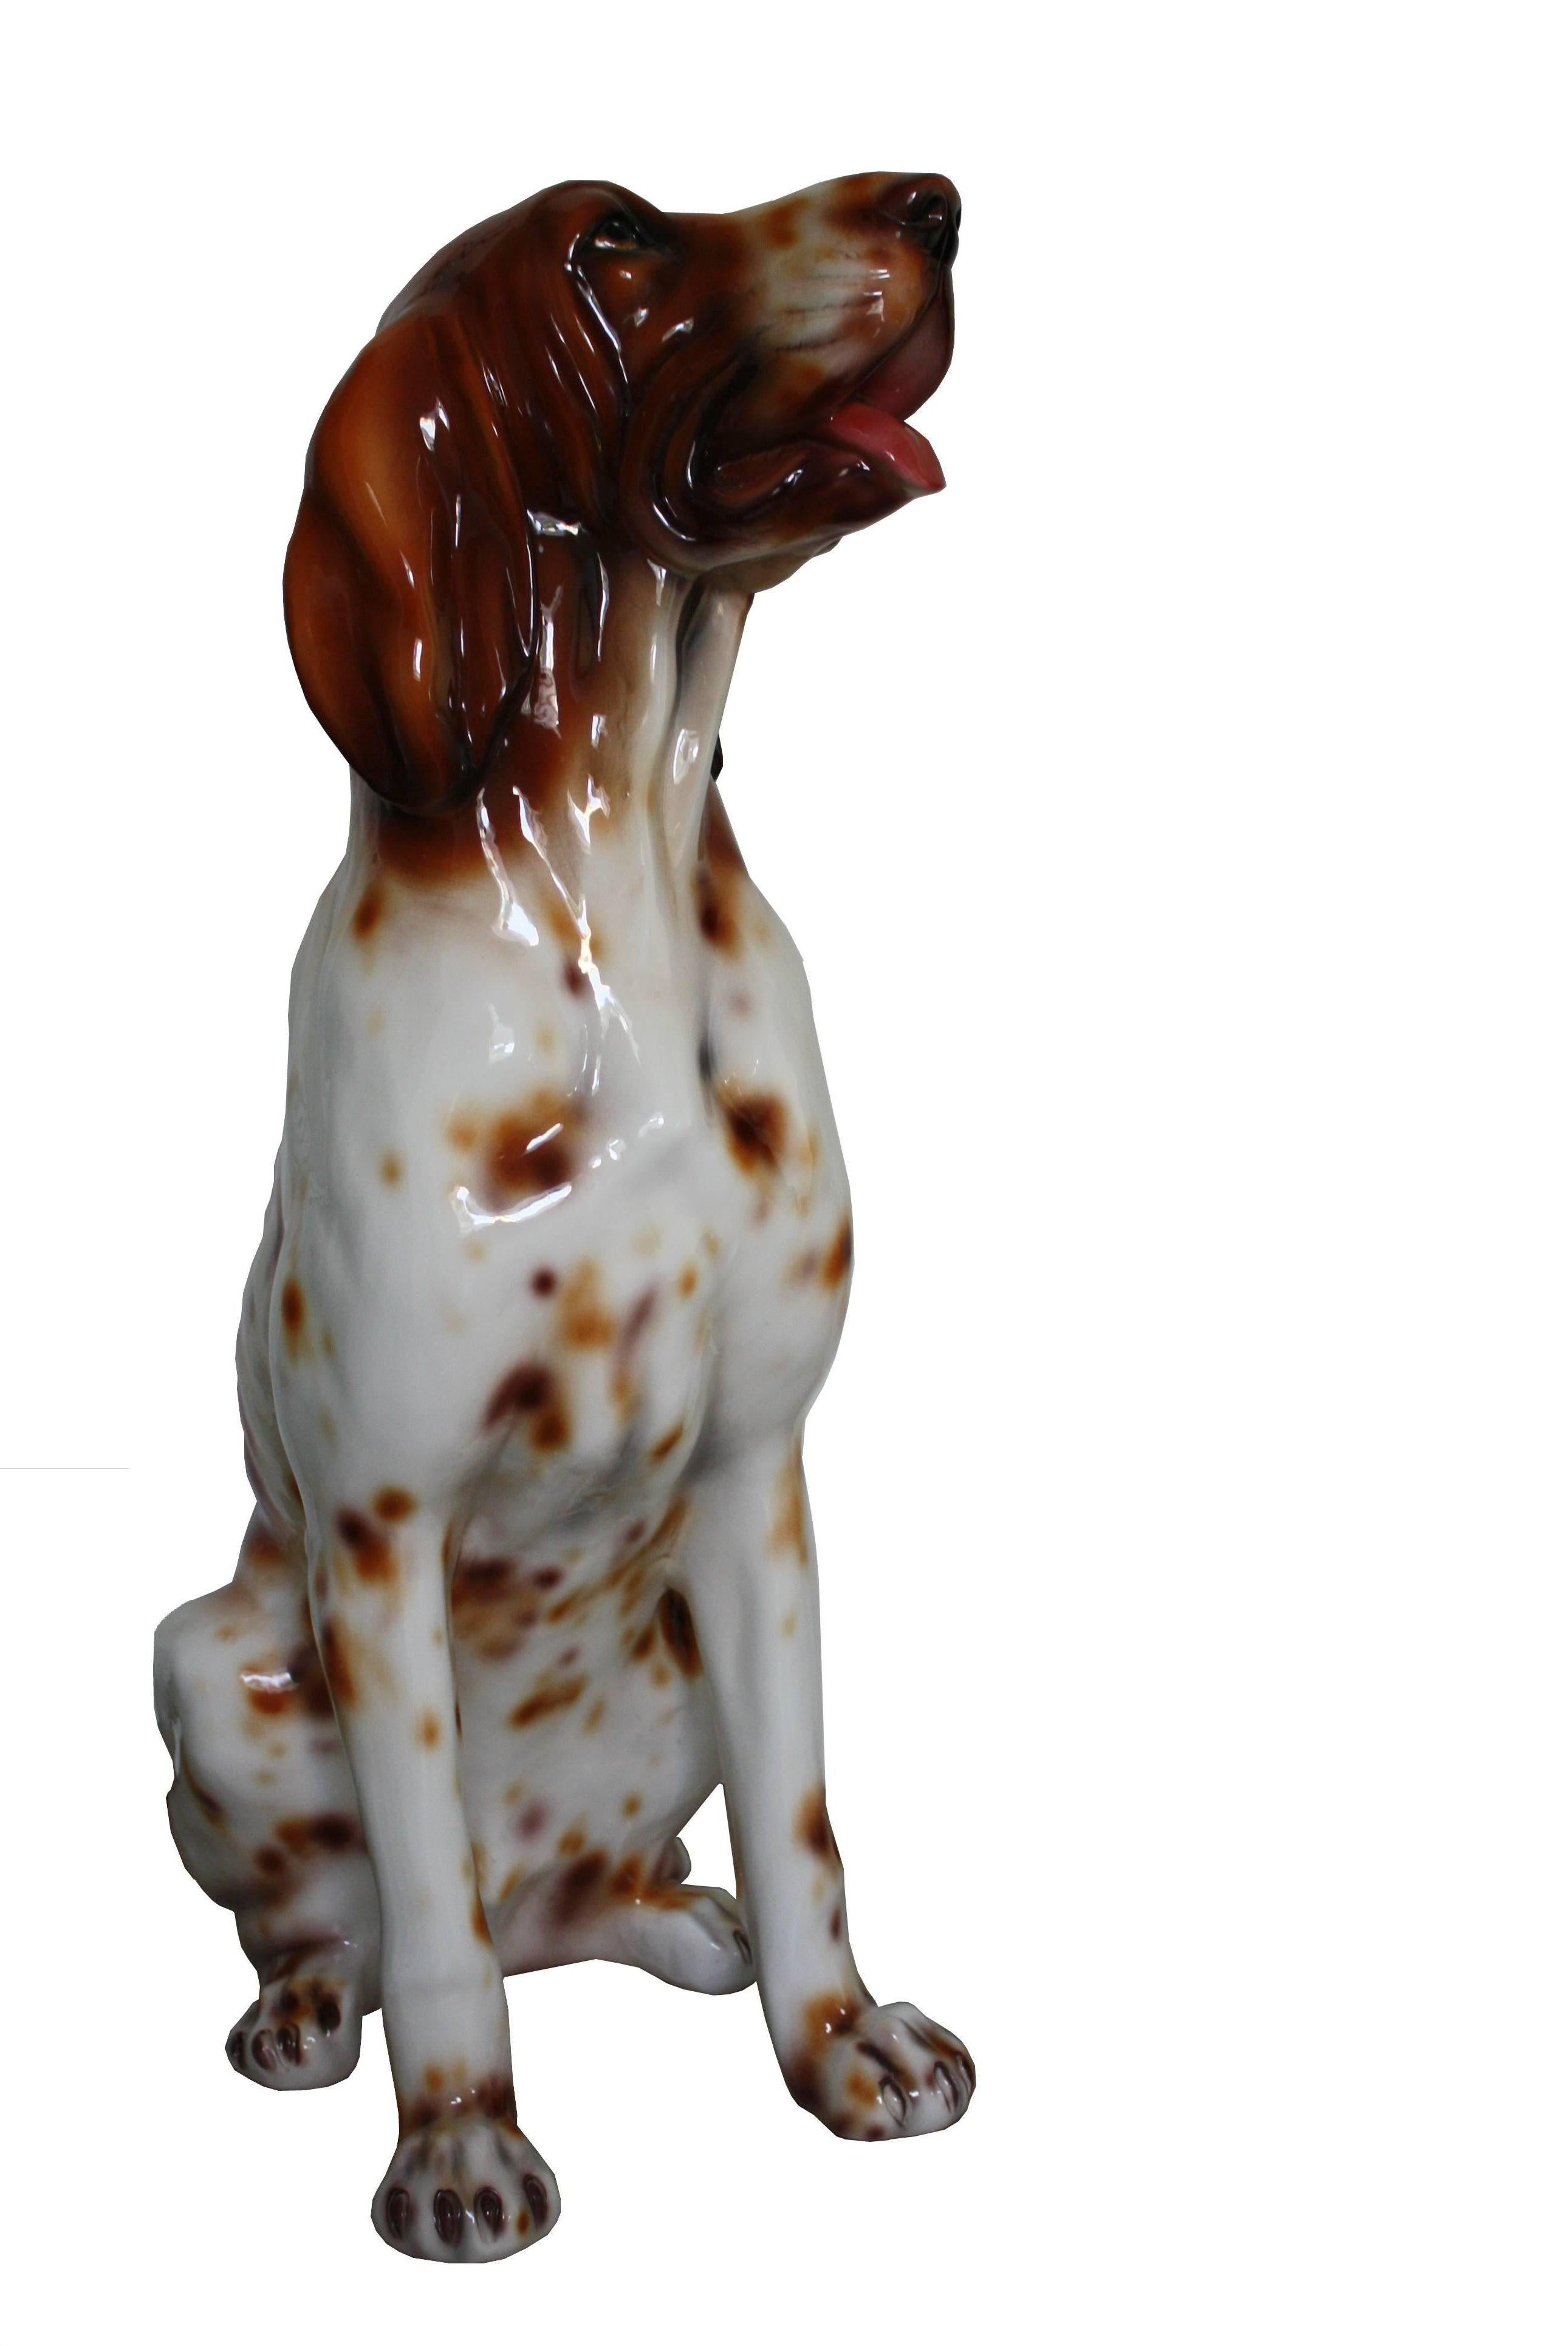 Life-sized vintage ceramic dog sculpture.

This sitting hunting dog statue is stamped 'made in italy'

An eye-catching decoration piece.

Perfect condition.

Measures: Height 75cm/30".